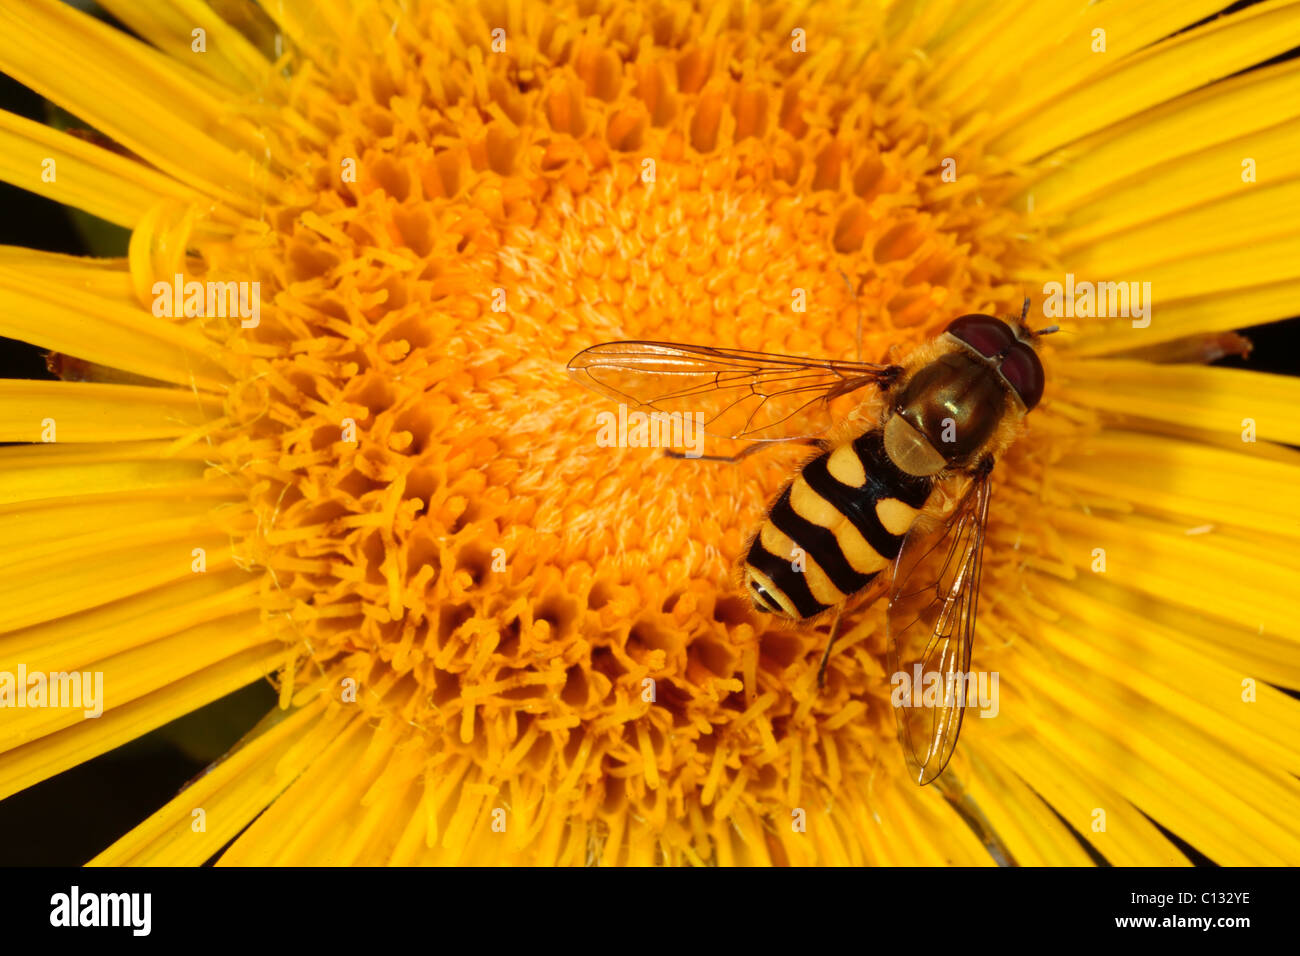 Hoverfly Syrphus sp. male feeding on an Inula flower in a garden. Powys, Wales. Stock Photo